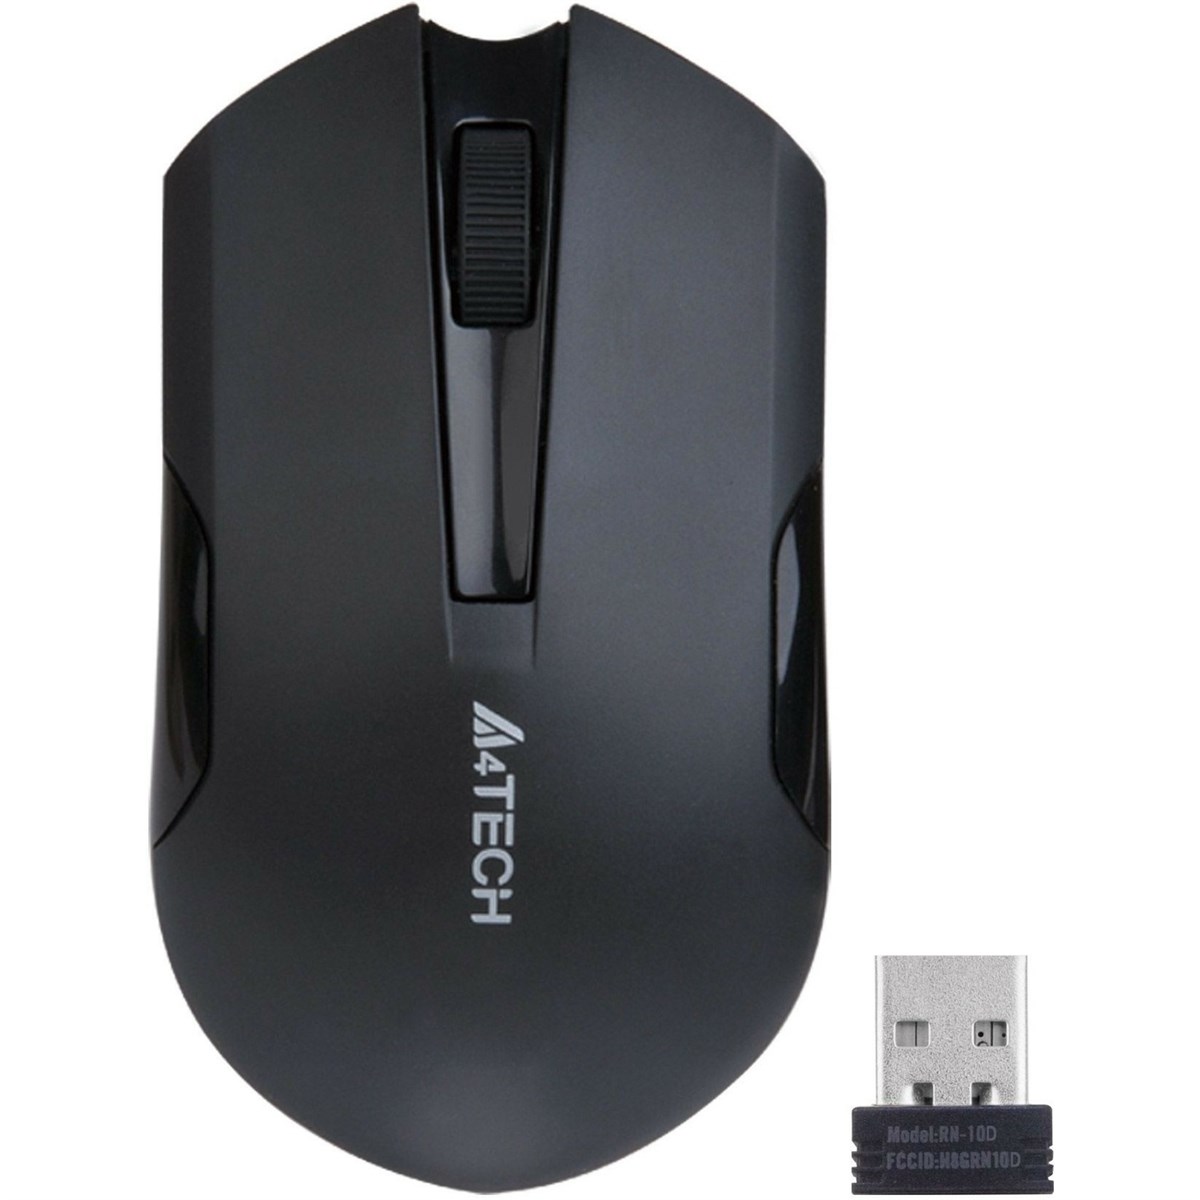 MOUSE A4TECH WIRELESS G3-200N ,Mouse